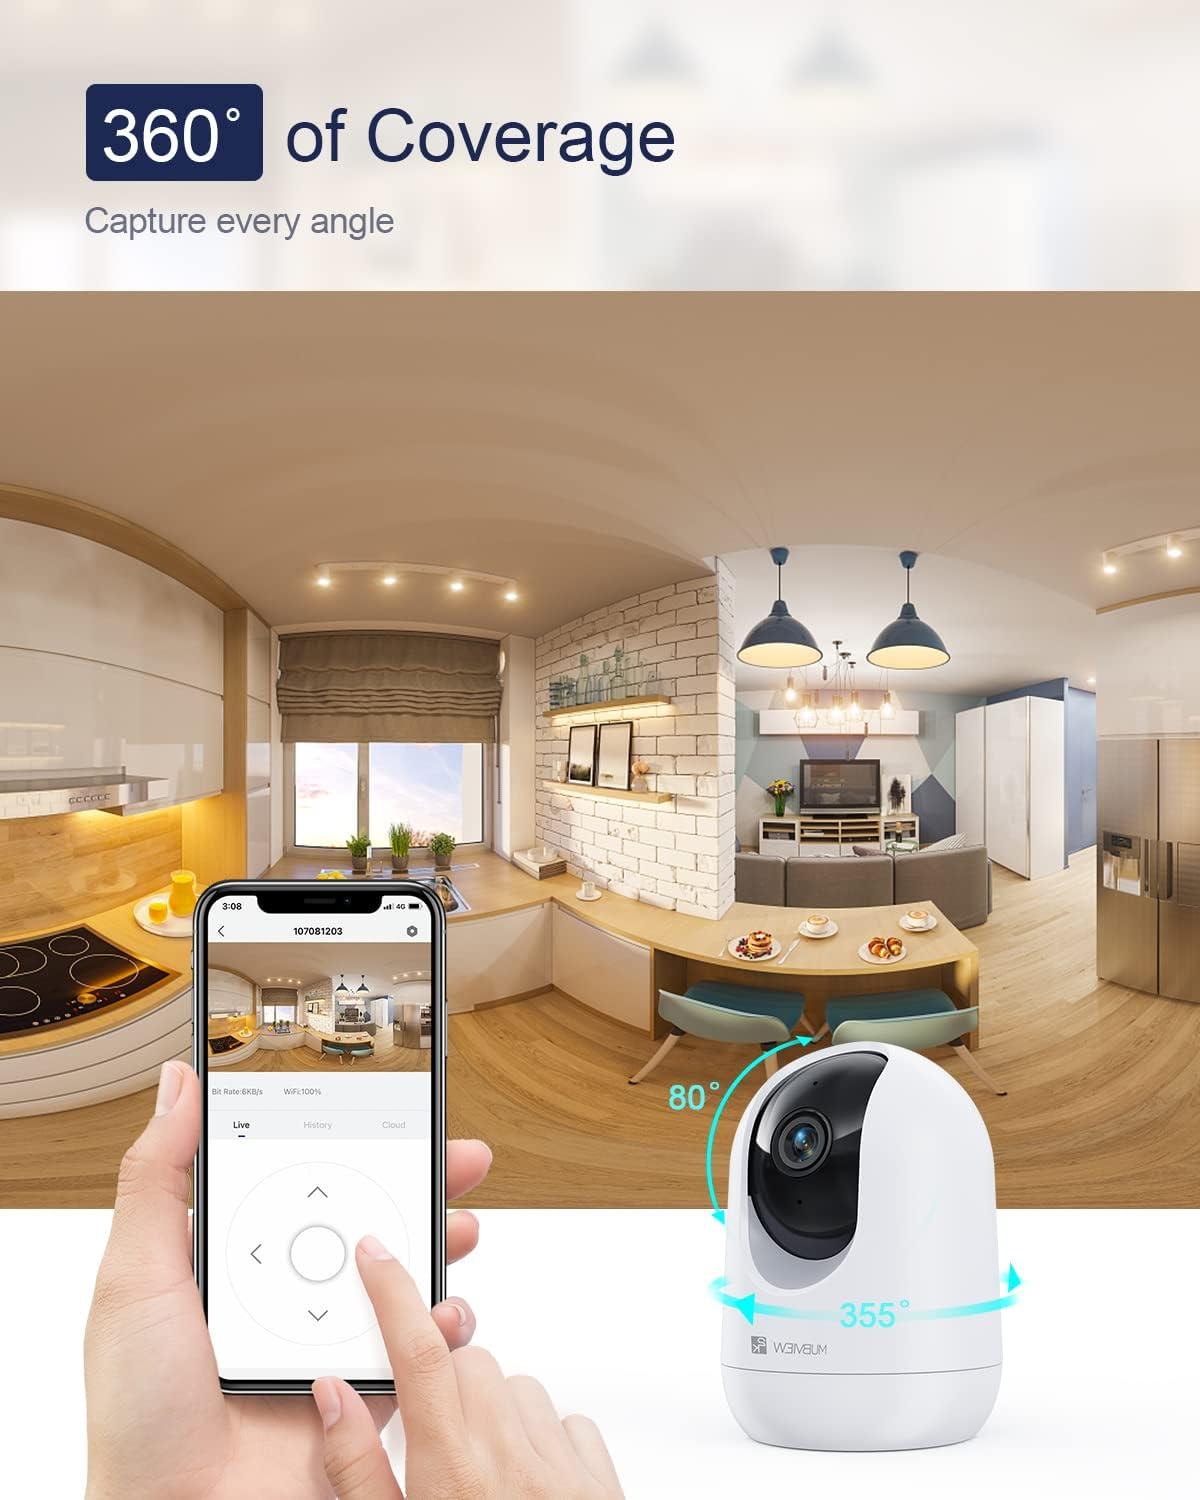 Mi Home Security Camera 360 ° 2K for a safe and smart home